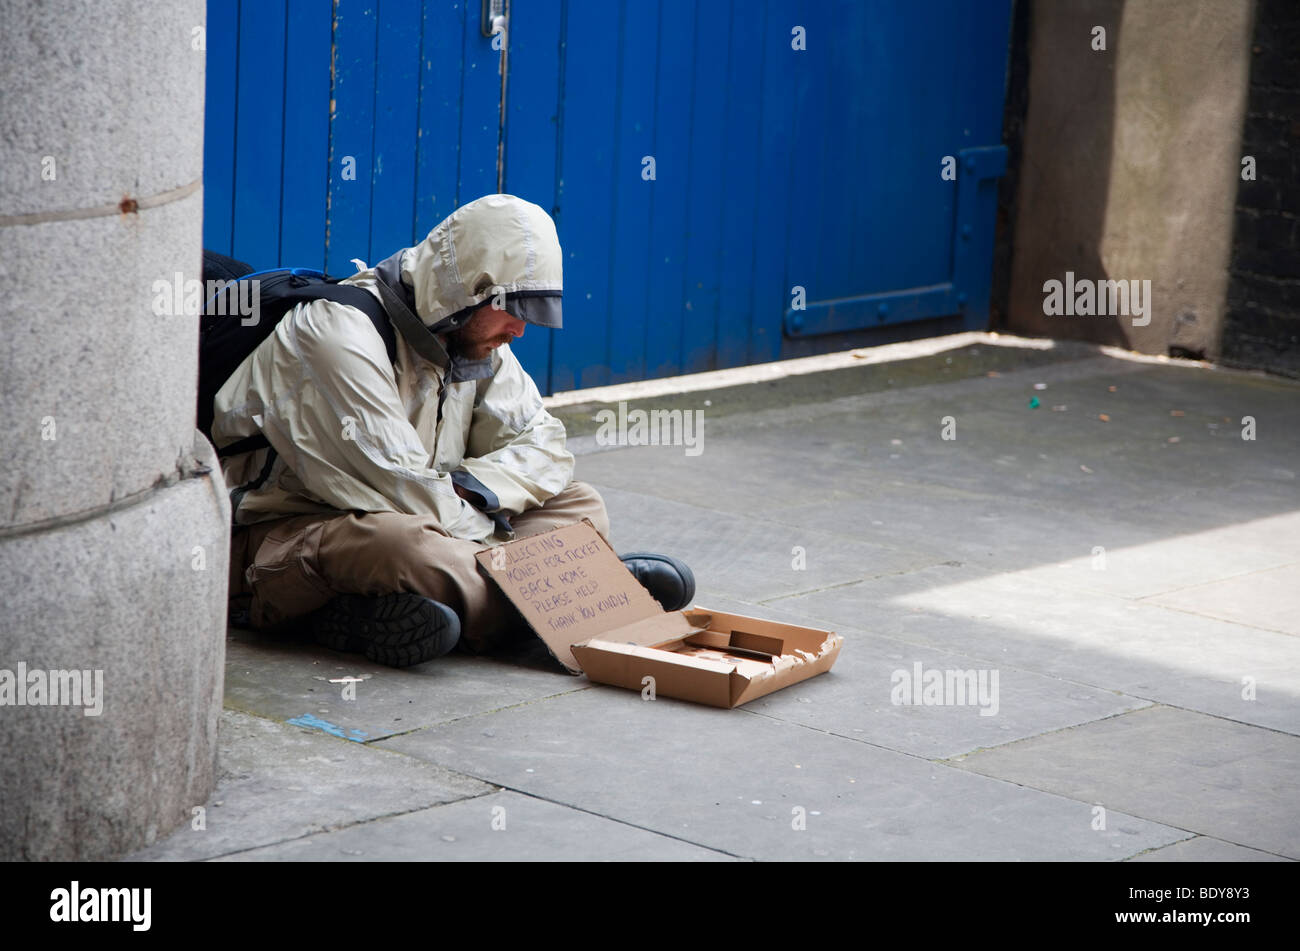 Man sitting on pavement, begging for money for his return ticket home, London, Soutbank, England, summertine evening. Stock Photo